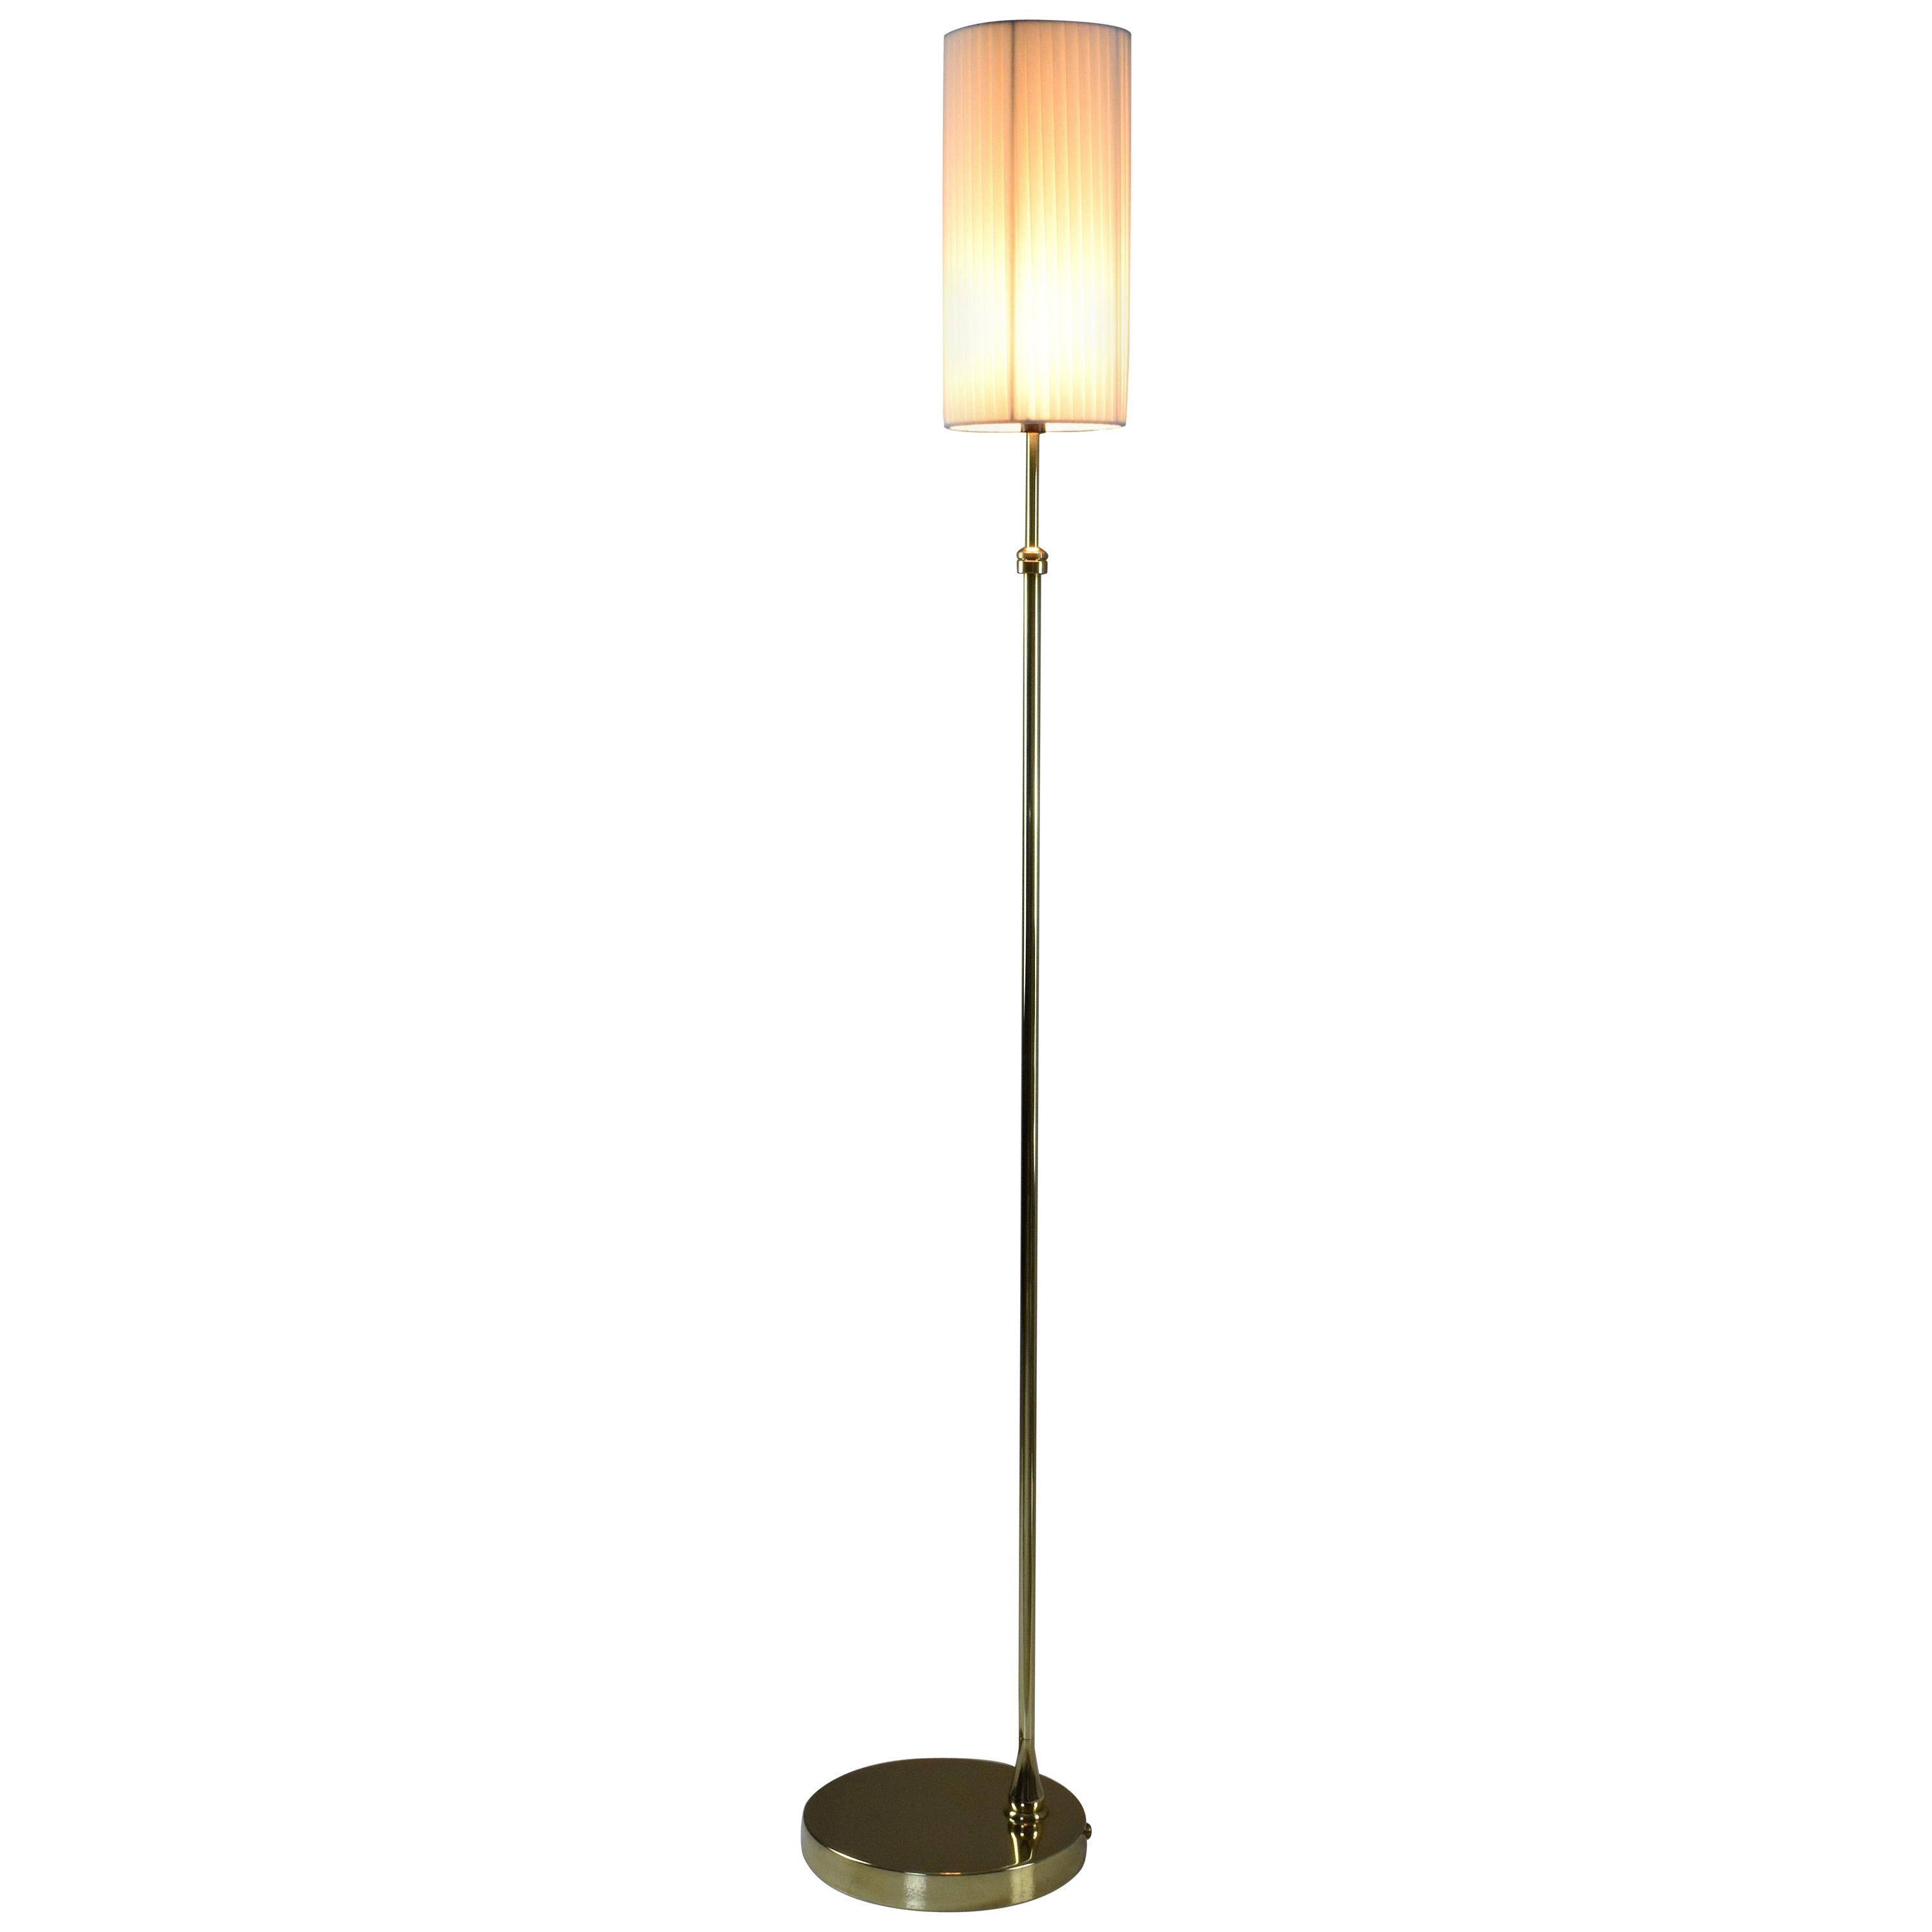 Equilibrium-I Contemporary Handcrafted Adjustable Brass Floor Lamp